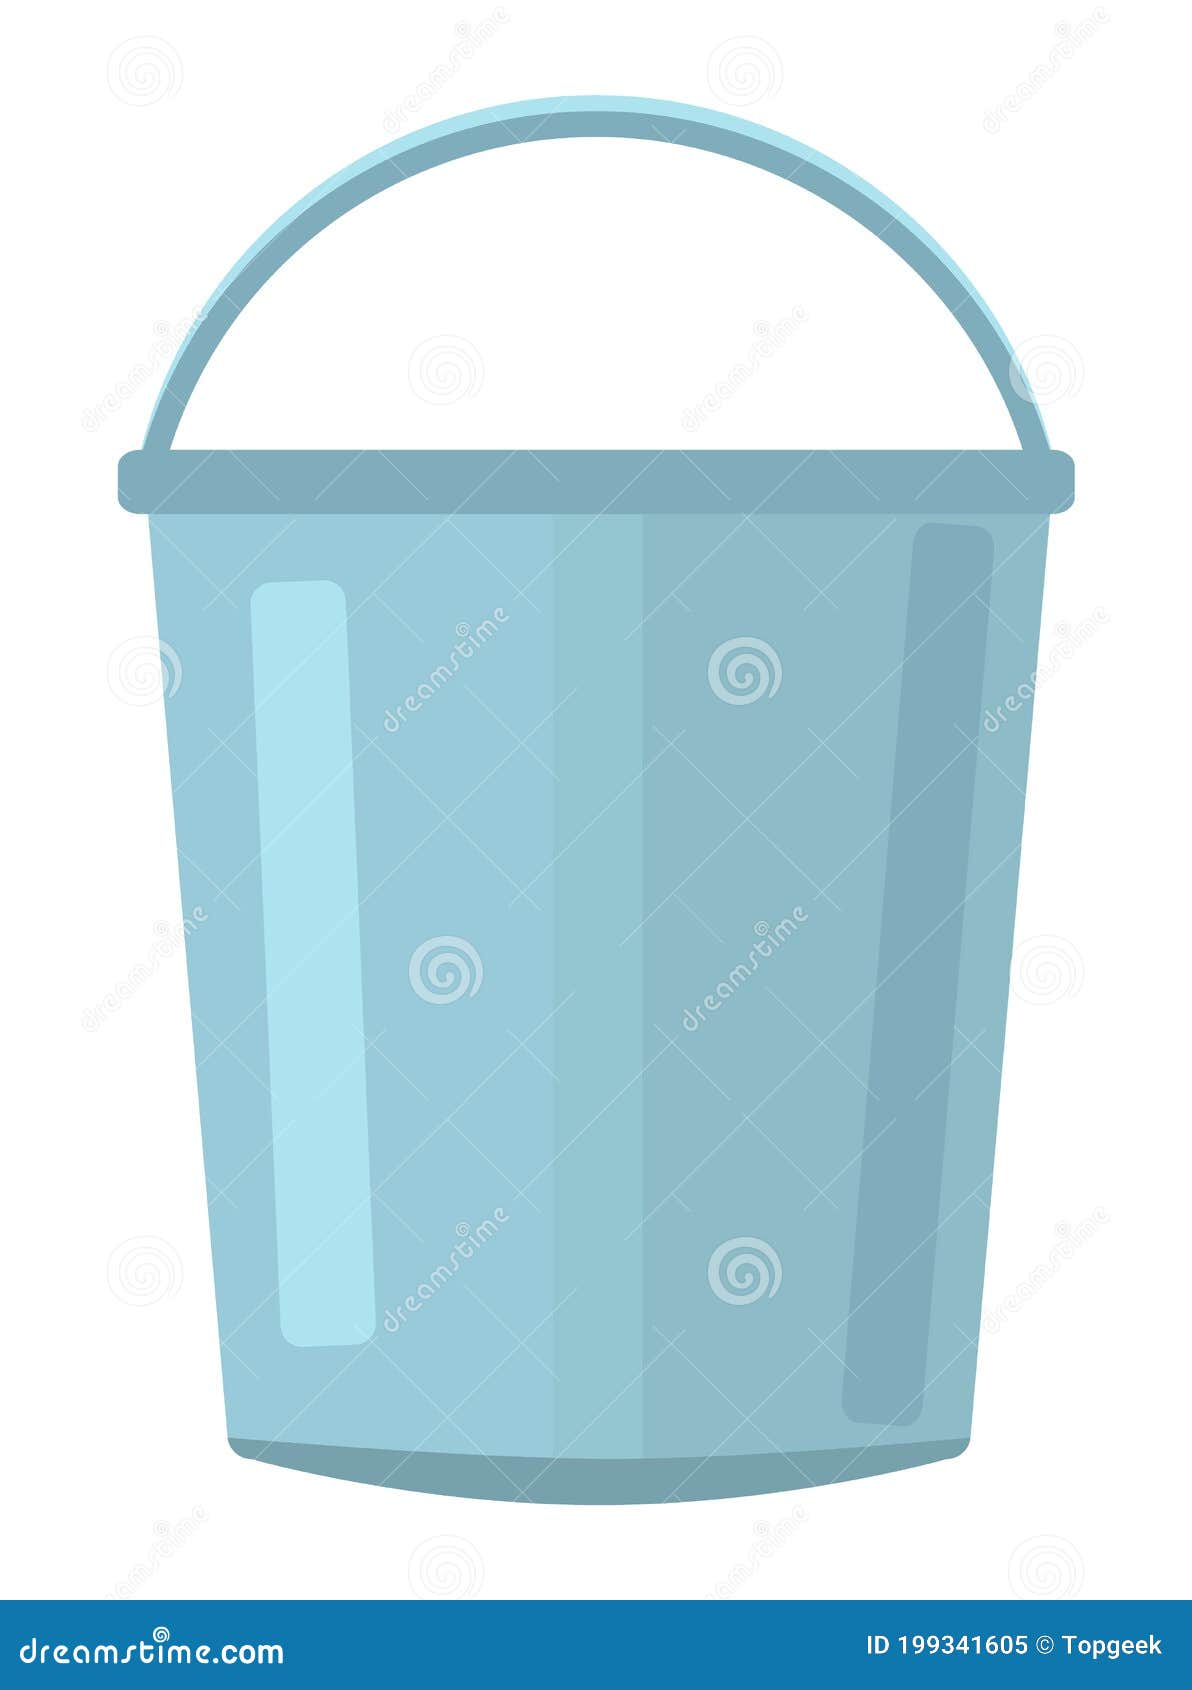 https://thumbs.dreamstime.com/z/blue-plastic-bucket-water-mopping-floors-cleaning-house-wet-flat-image-cartoon-high-cylindrical-handle-mop-garbage-199341605.jpg